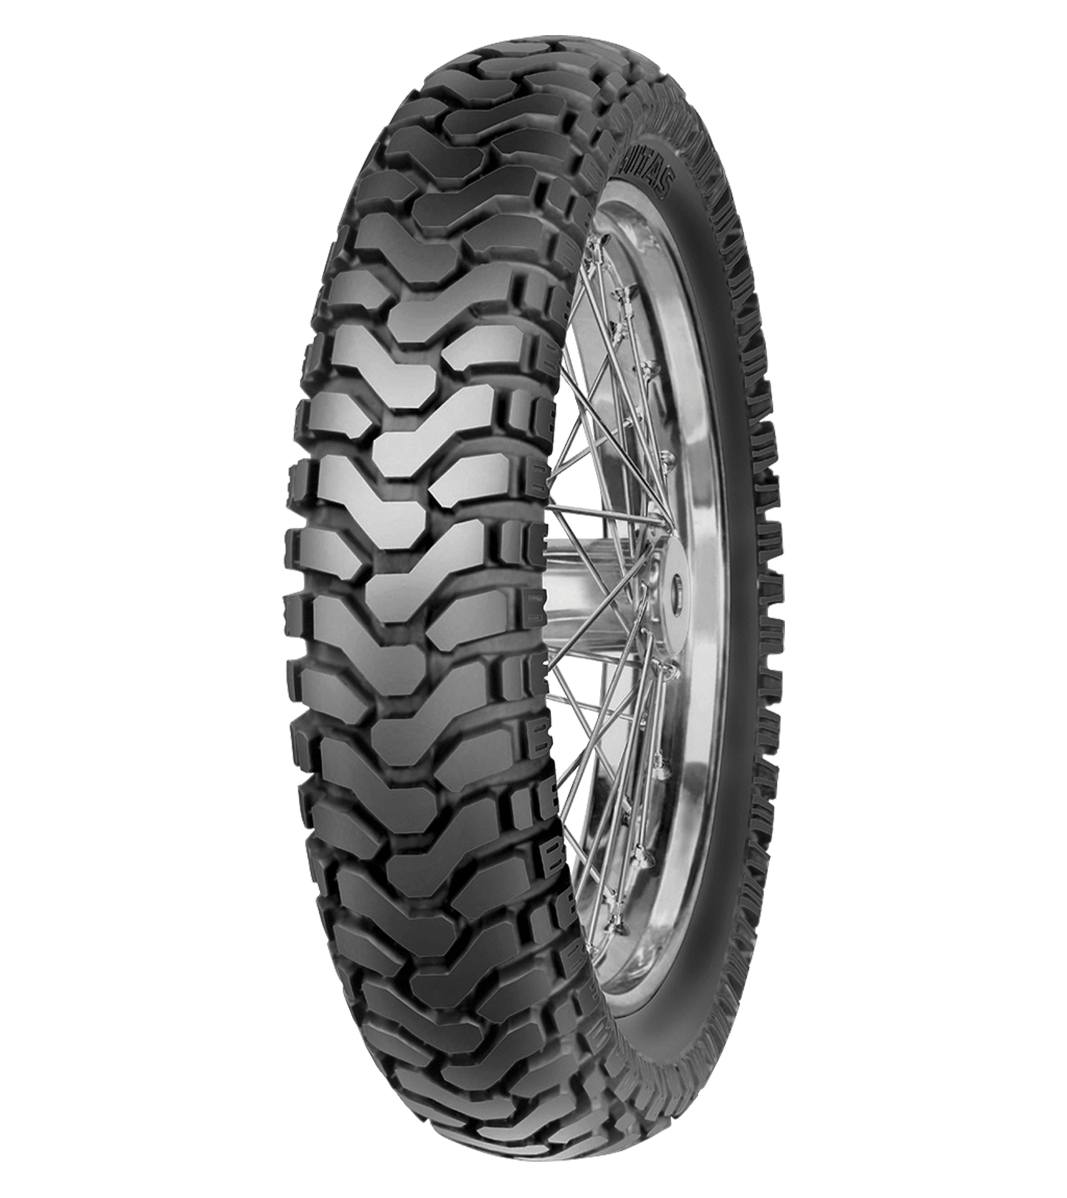 Mitas E-07 ENDURO 130/80-17 Trail OFF Trail 65T No Stripe Tubeless Rear Tire, 224133, 130/80-17, Adventure Touring, E Series, E-07 Enduro, Rear, Trail, Trail OFF, Tires - Imported and distributed in North & South America by Lindeco Genuine Powersports - Premier Powersports Equipment and Accessories for Motorcycle Enthusiasts, Professional Riders and Dealers.